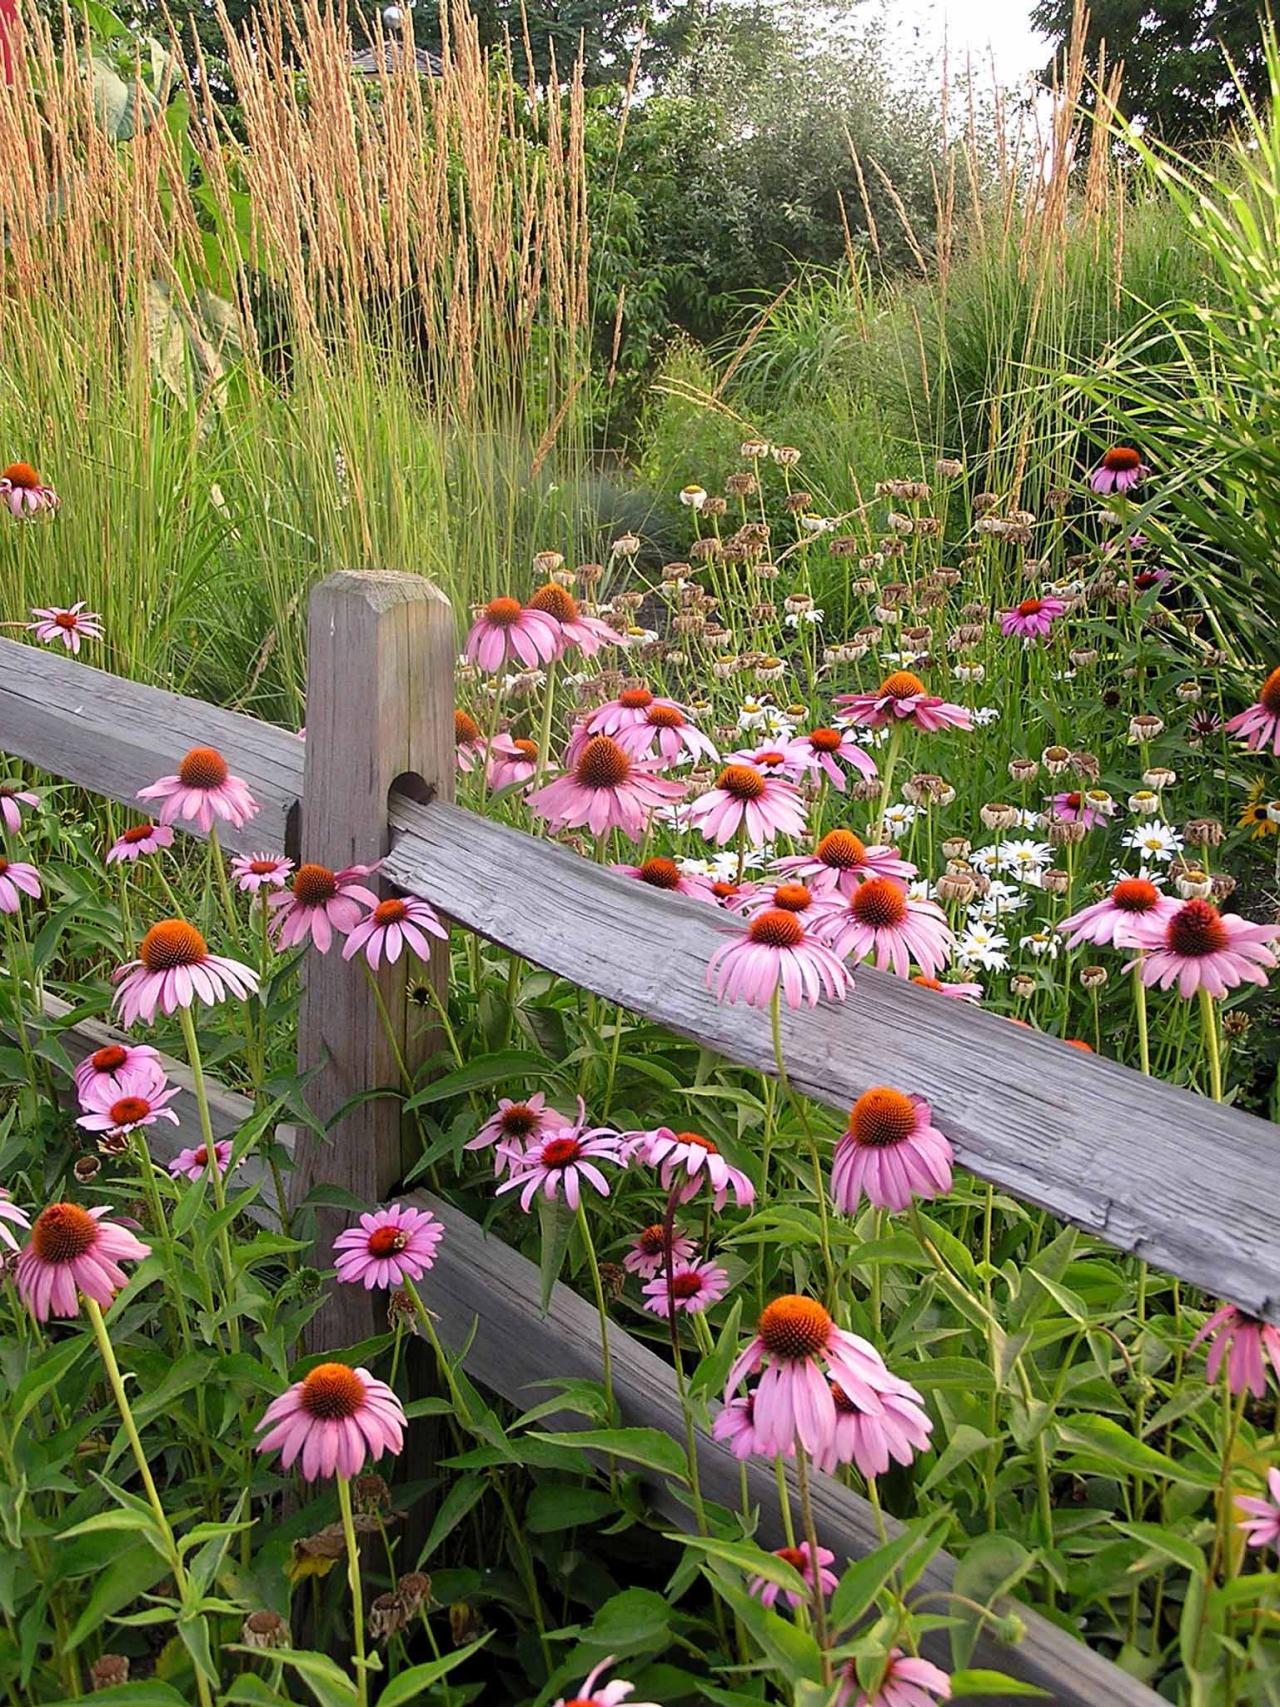 Plant Wildflowers in Your Garden and Keep Them Tidy and Organized ...